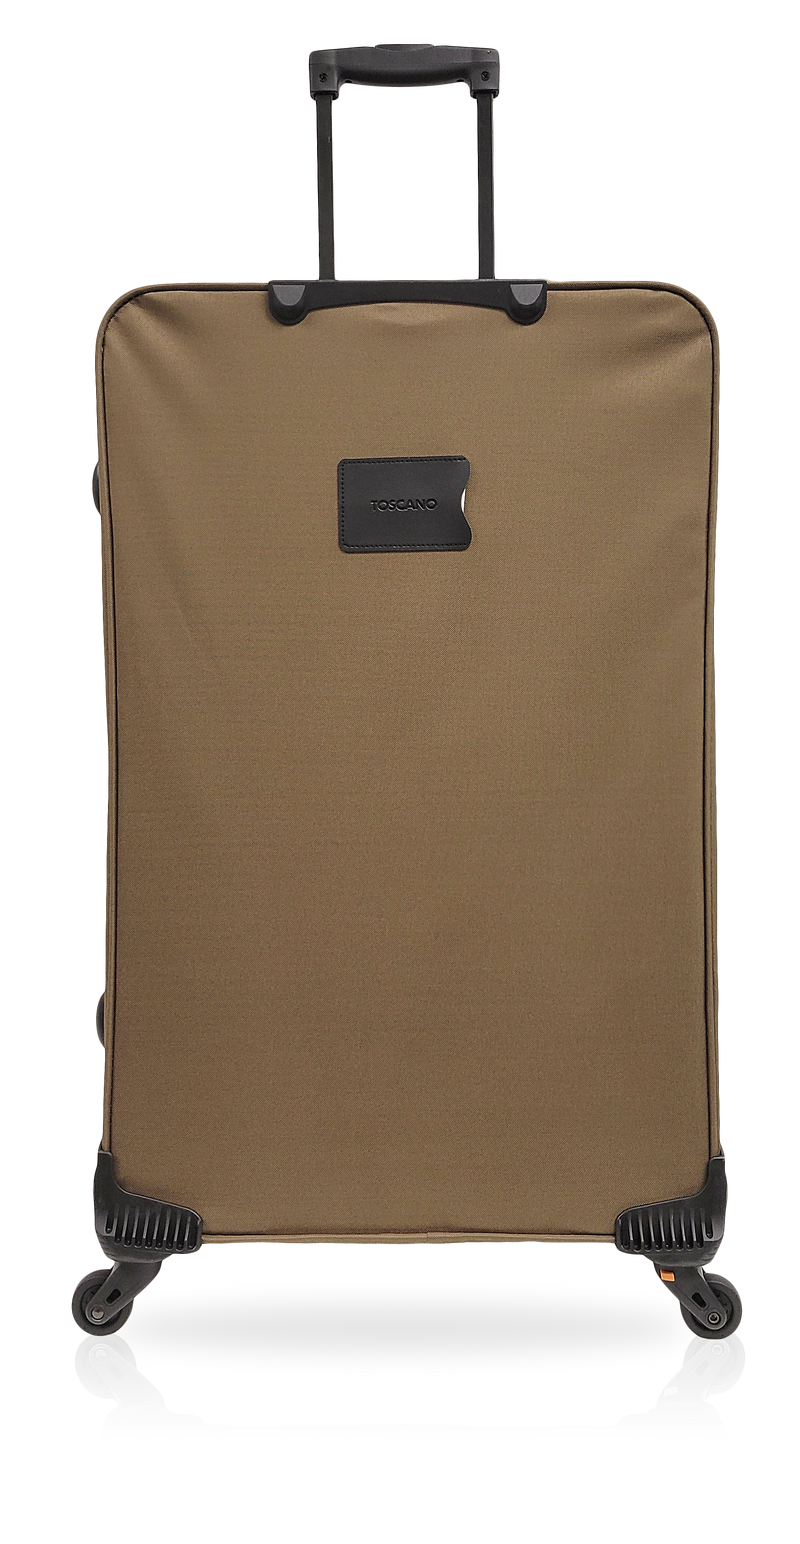 TOSCANO by Tucci NOTEVOLE 19" Lightweight Travel Luggage